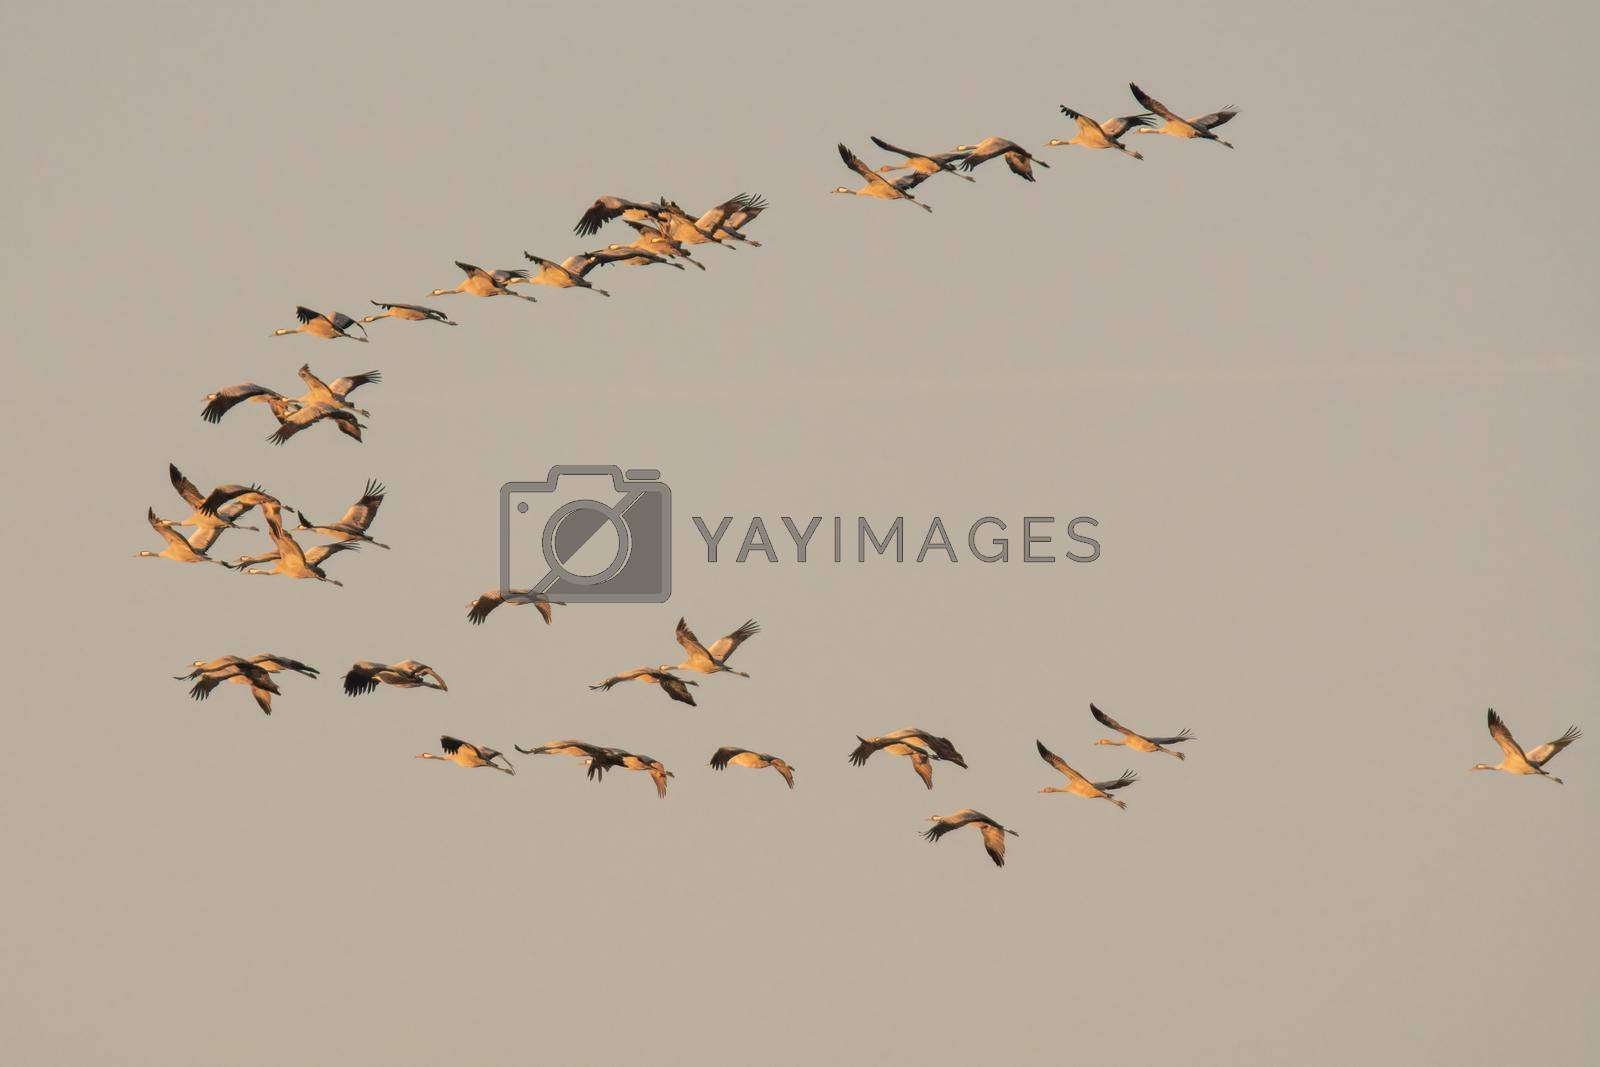 Royalty free image of several cranes fly in the sky by mario_plechaty_photography